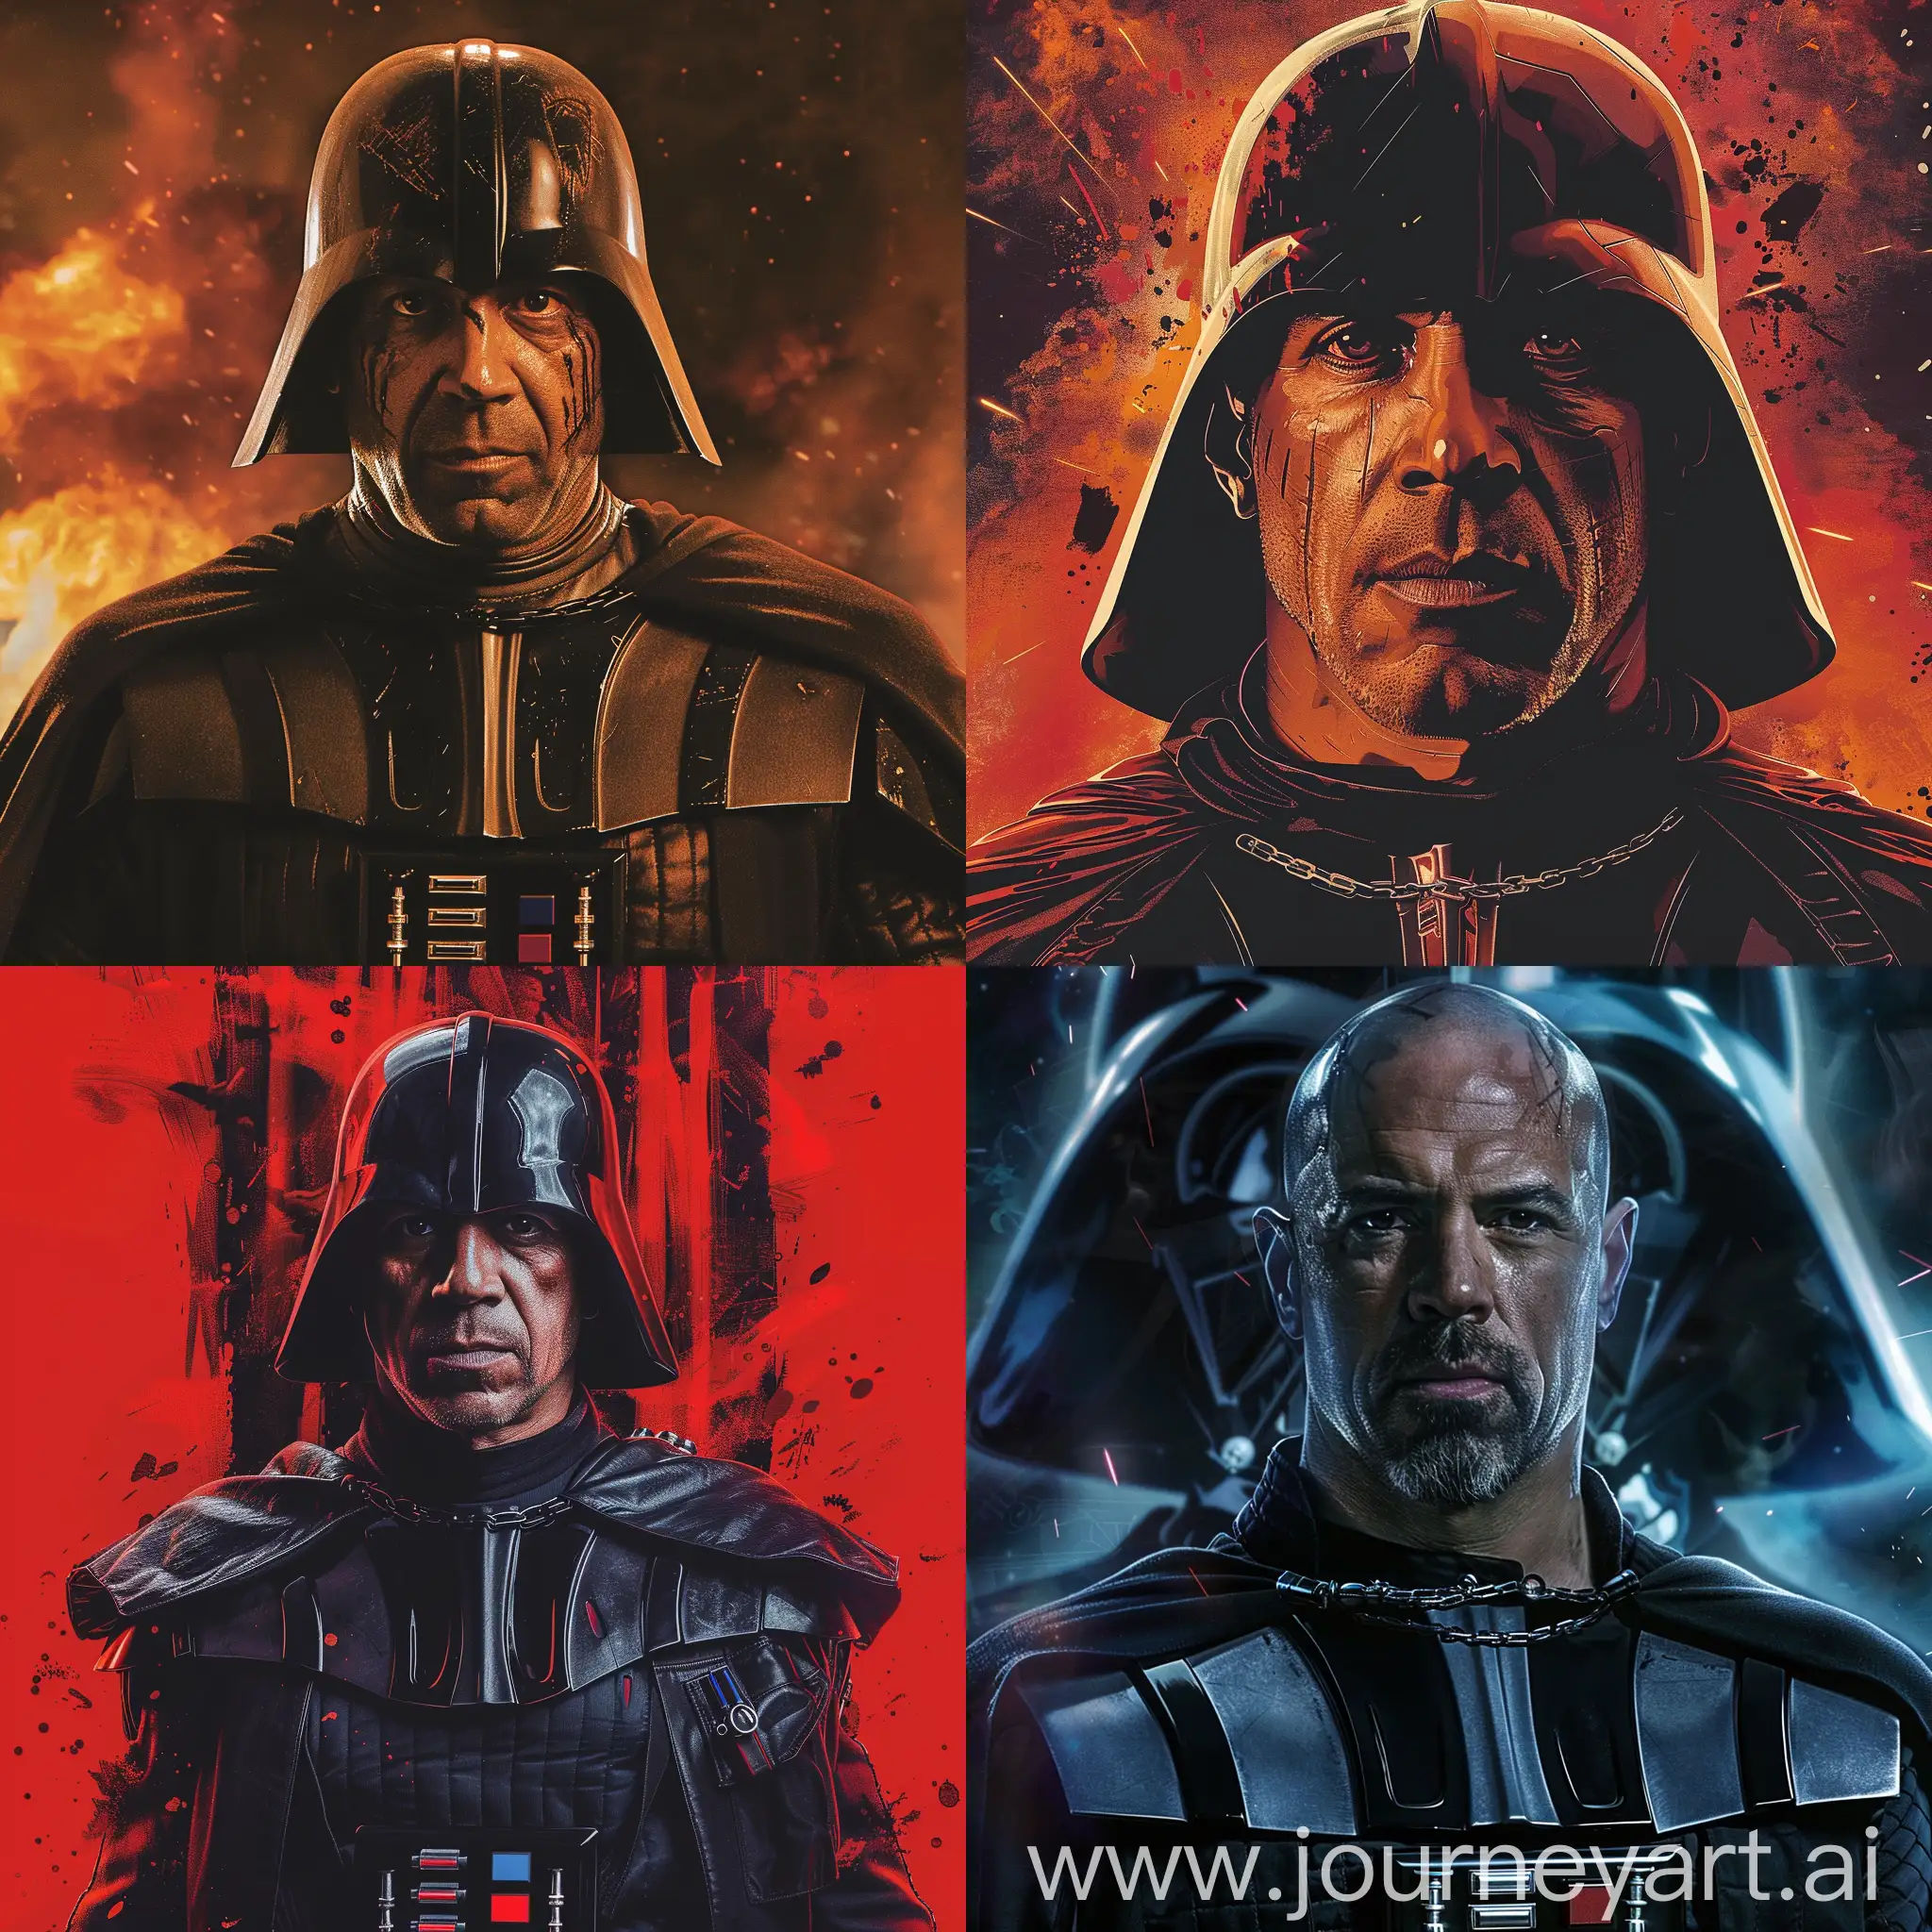 Darth-Vader-and-Vin-Diesel-in-Forsazh-Movie-Cover